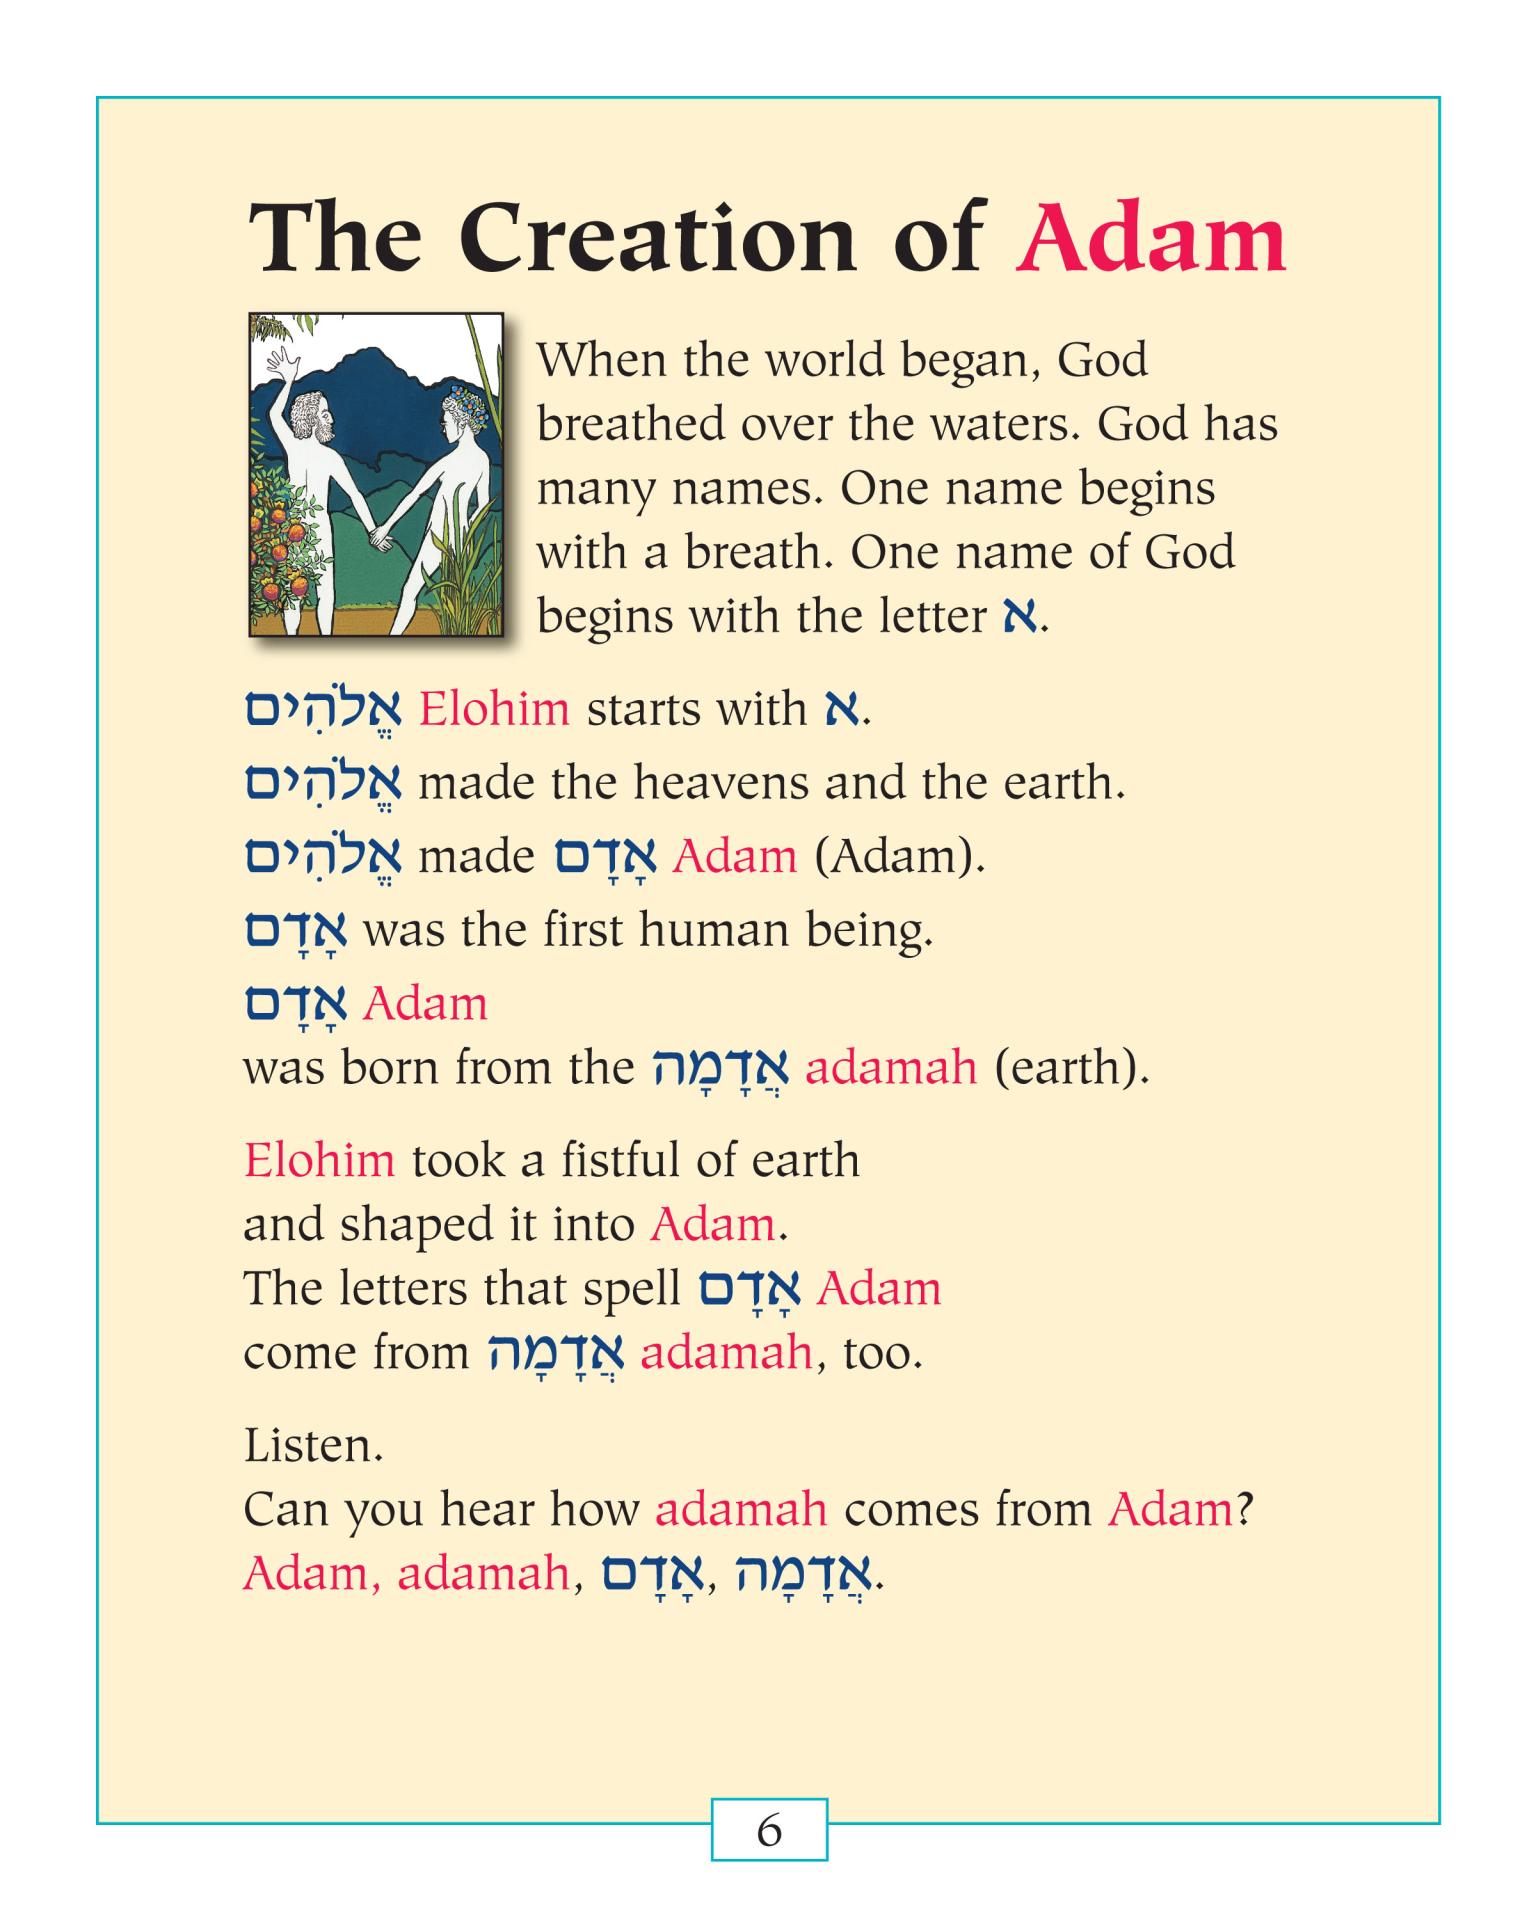 Page about the "Creation of Adam" with some Hebrew words ane English text describing Elohim's creation of Adam. 